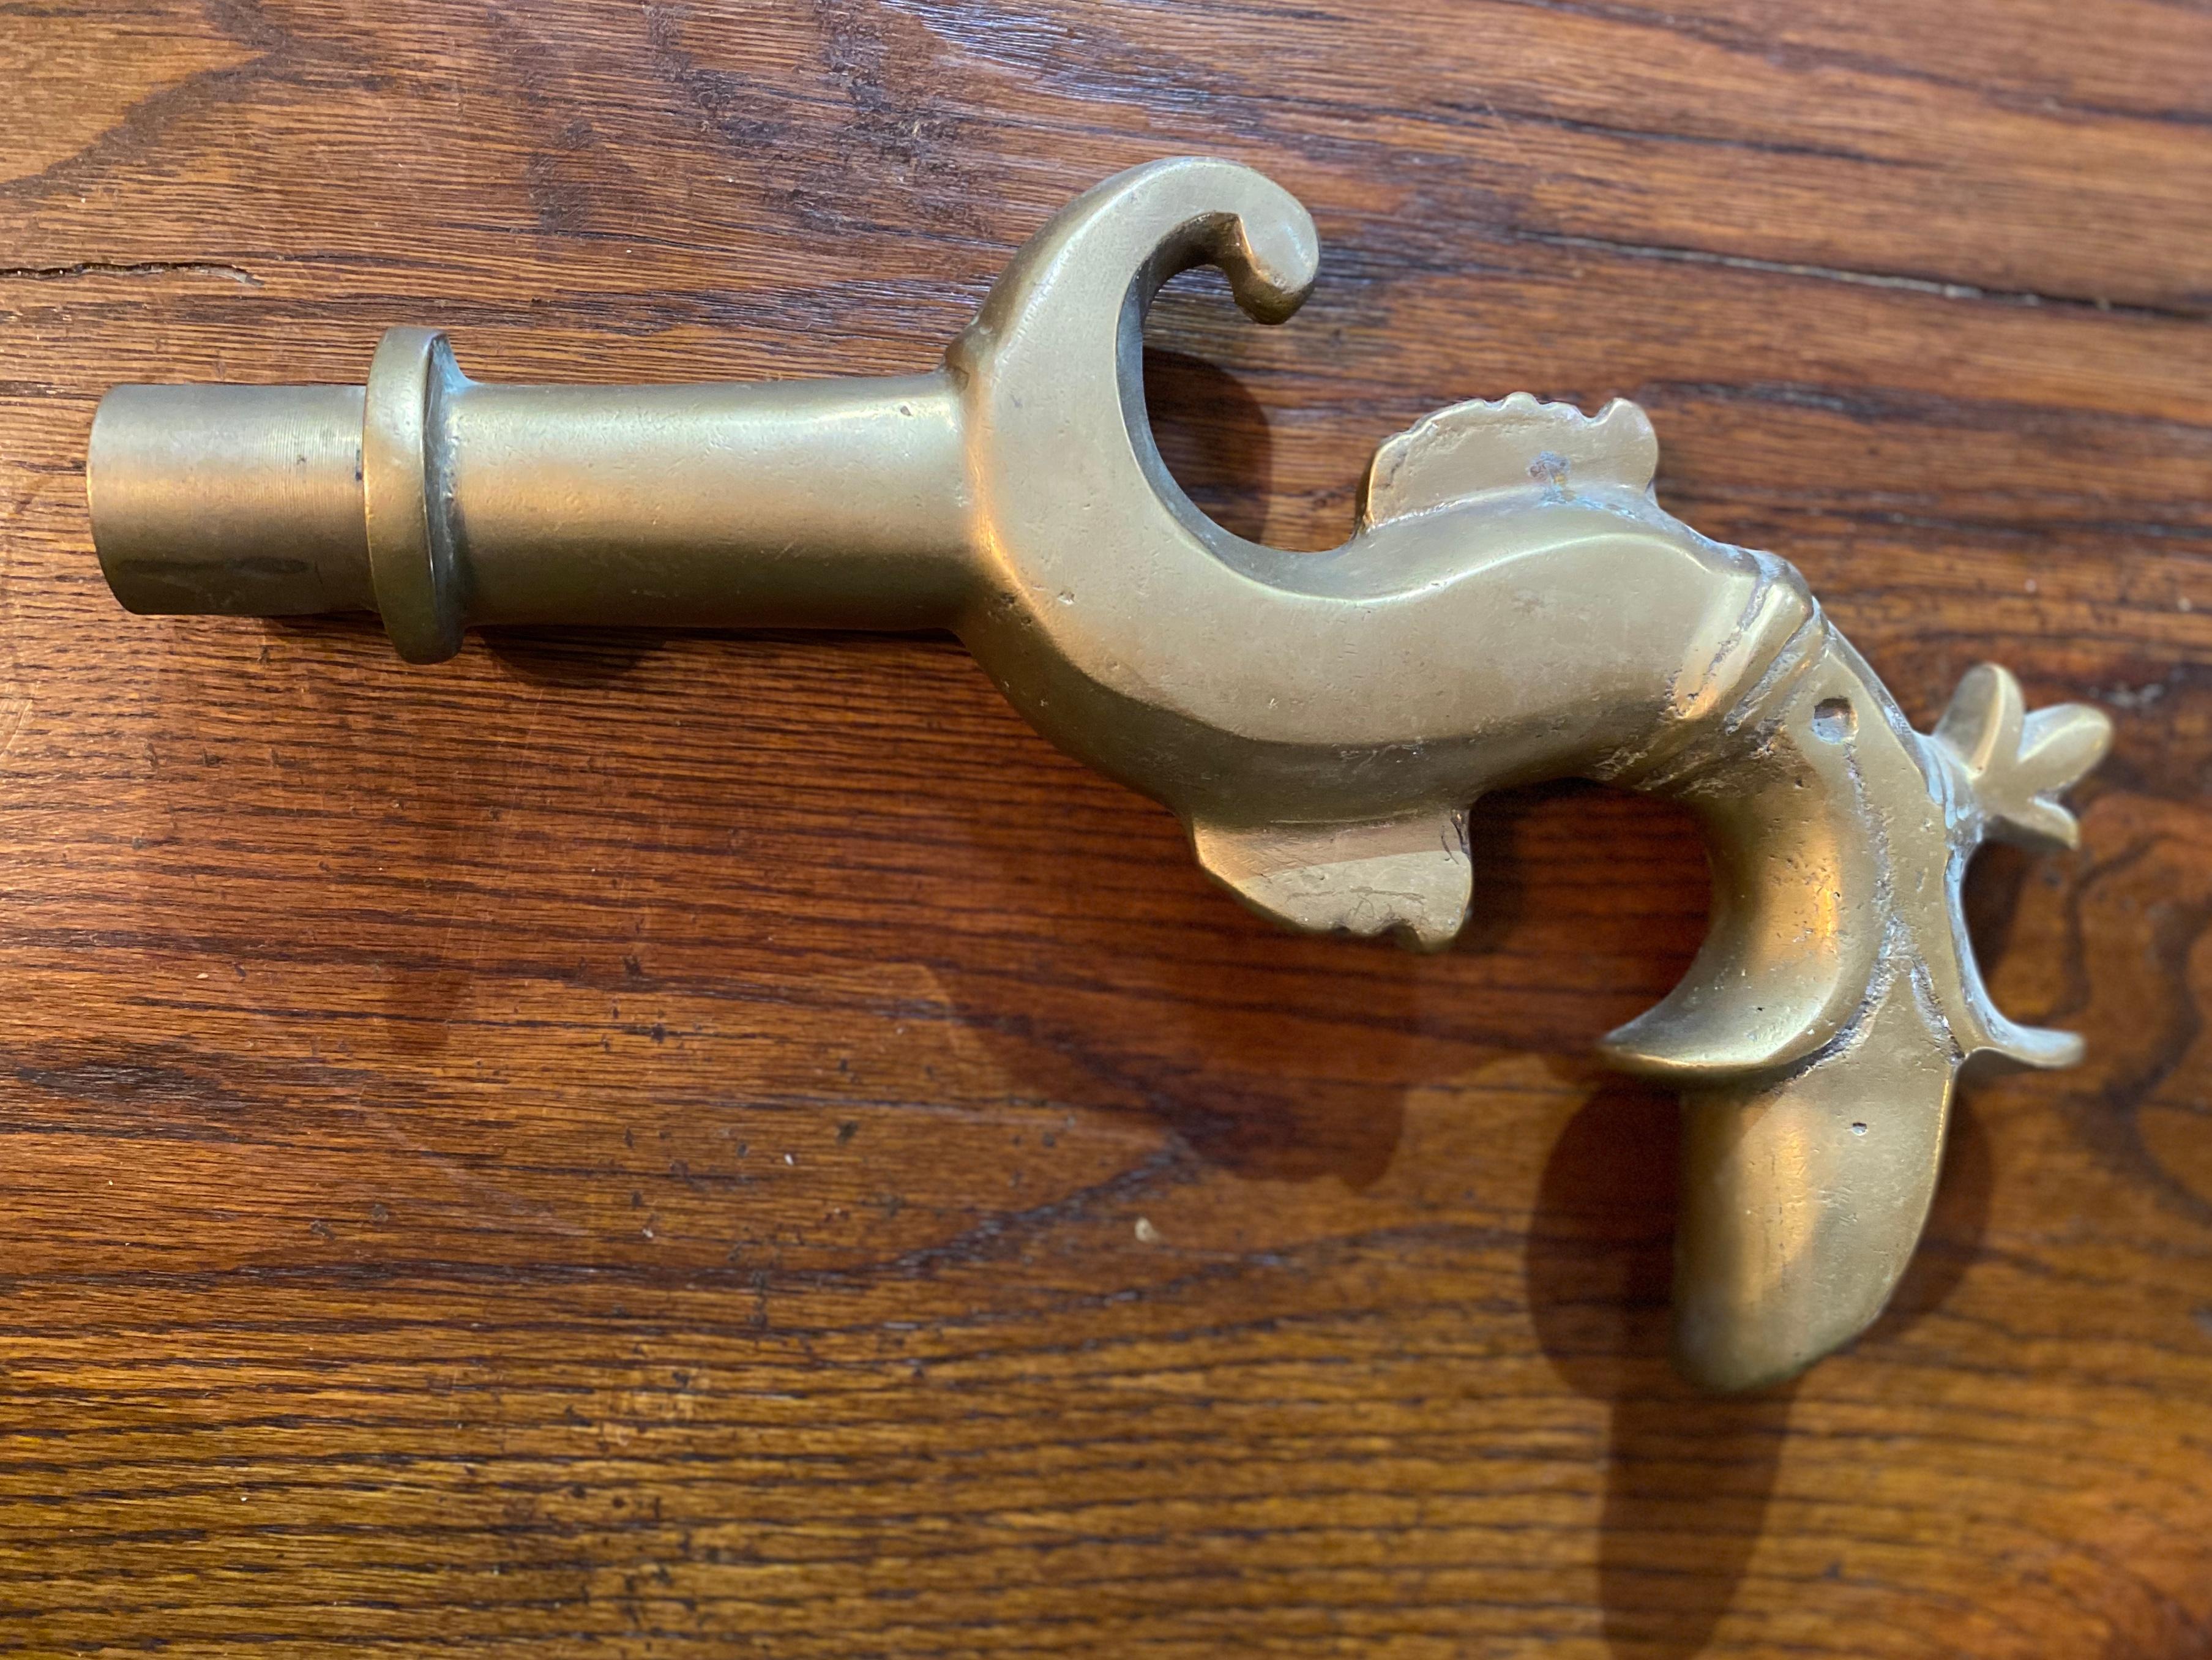 This spout is made of heavy brass and made in a decorative style to add character to your garden fountain. 

Measurements: 10.5” L x 6.5” H x 1.5” W.